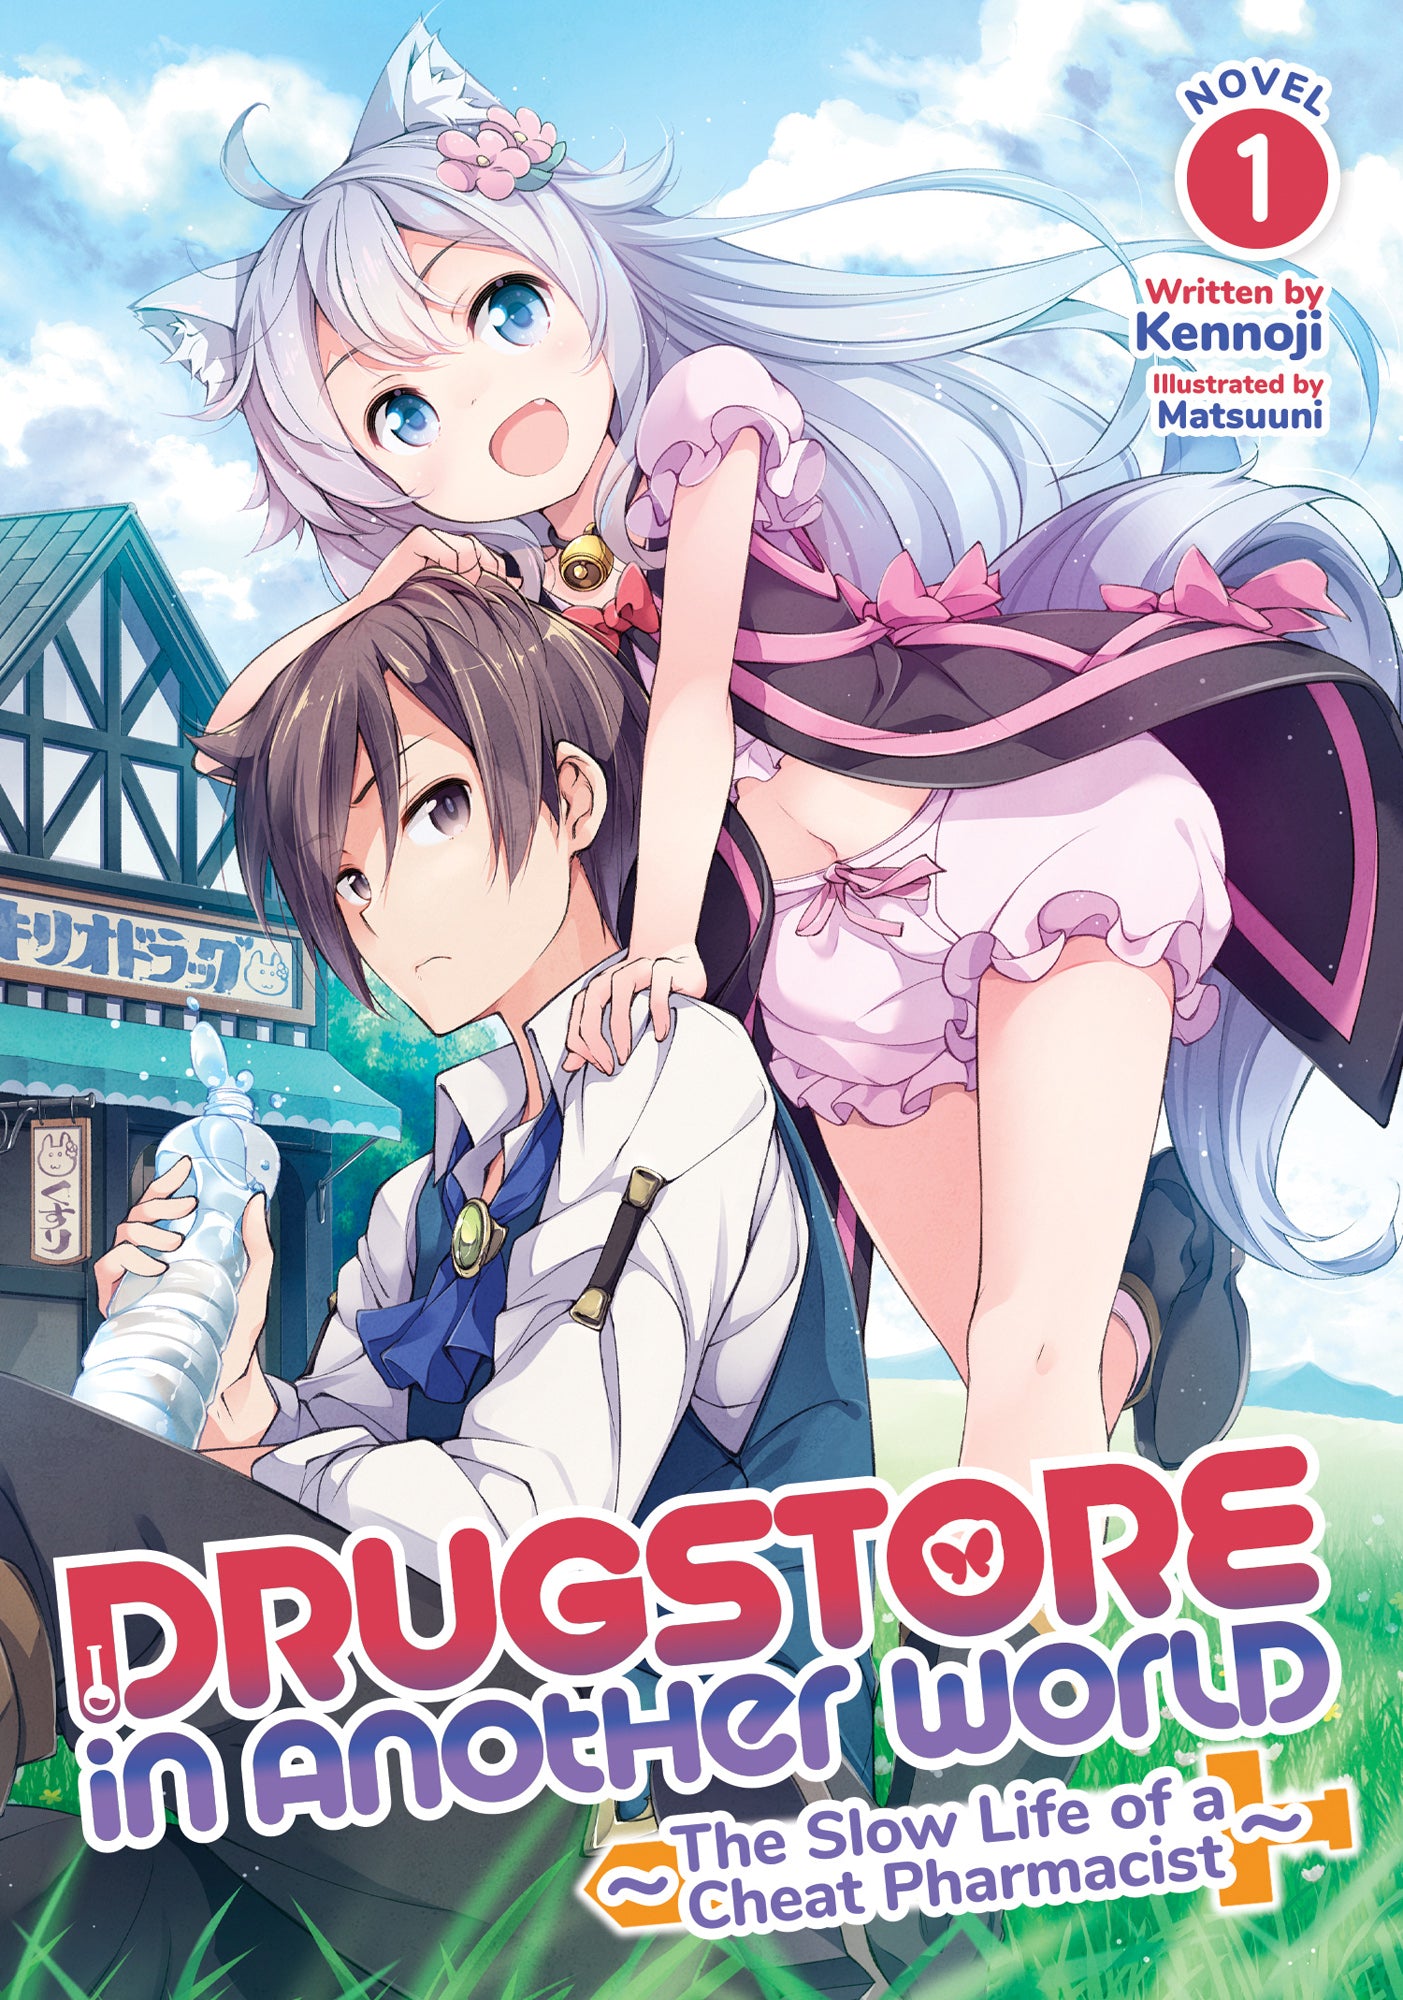 Drugstore in Another World: The Slow Life of a Cheat Pharmacist (Light Novel) Vol. 01